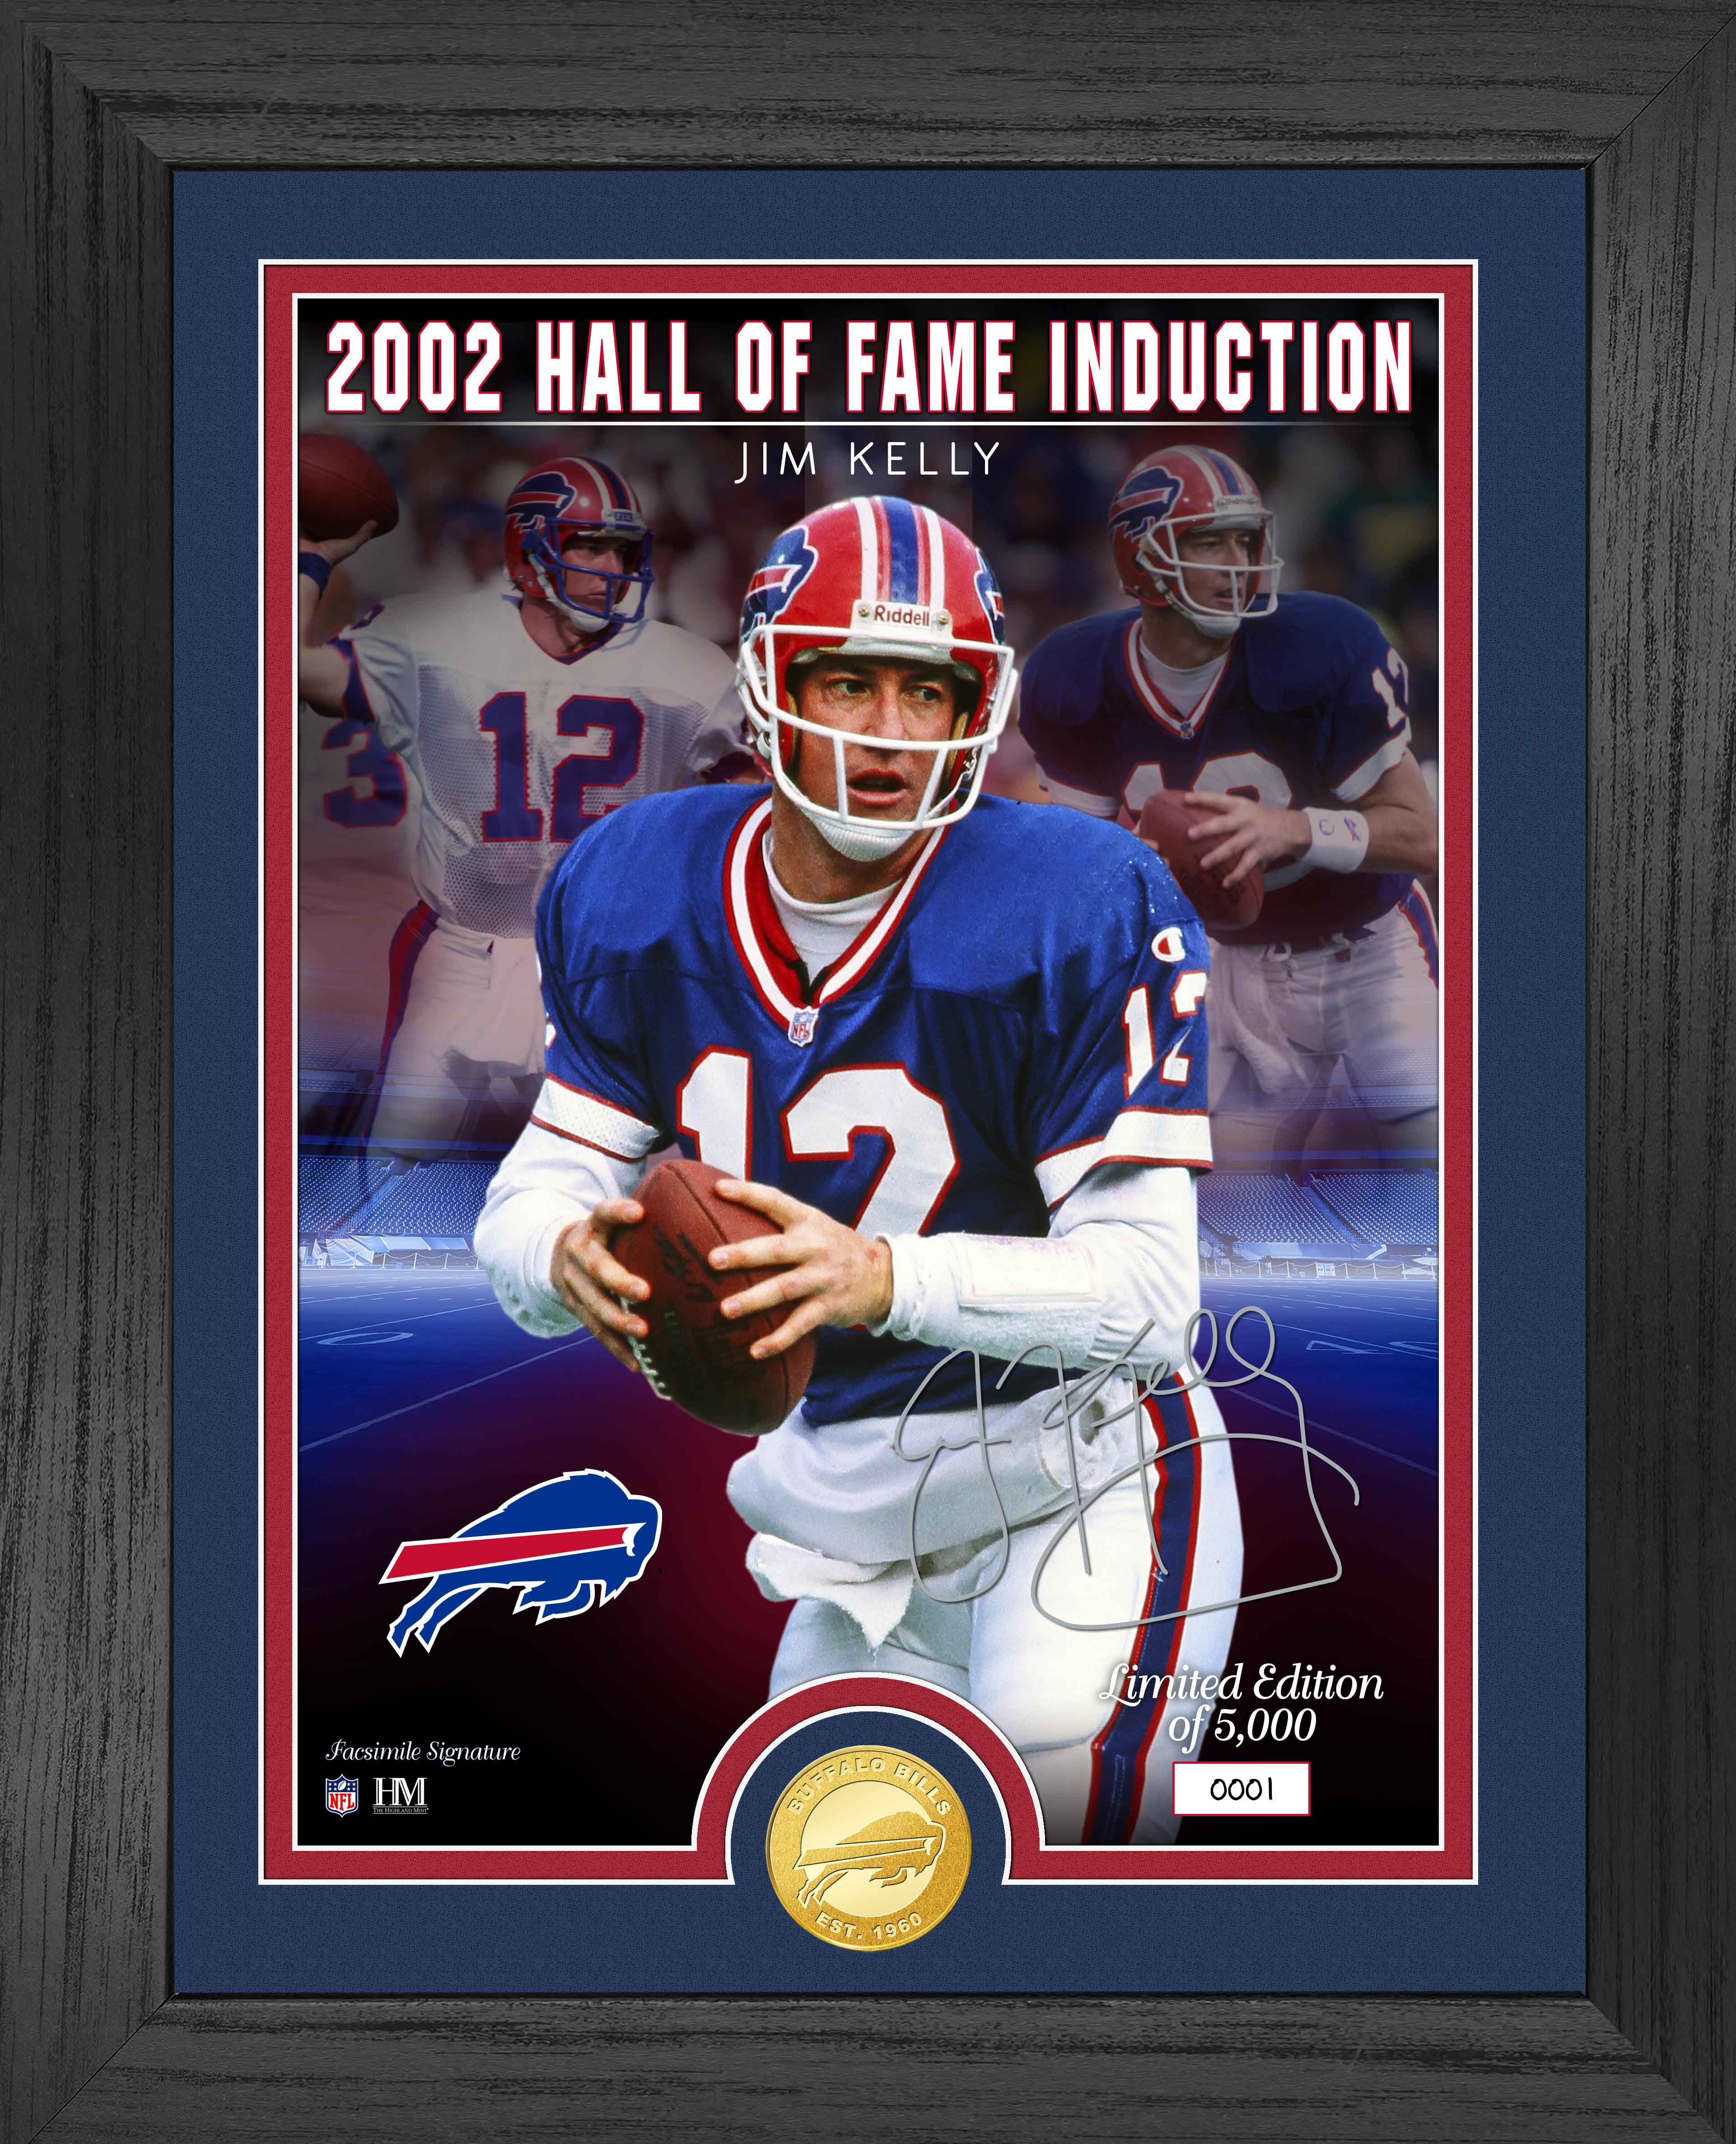 Jim Kelly Bills Hall of Fame Induction Bronze Coin Photo Mint